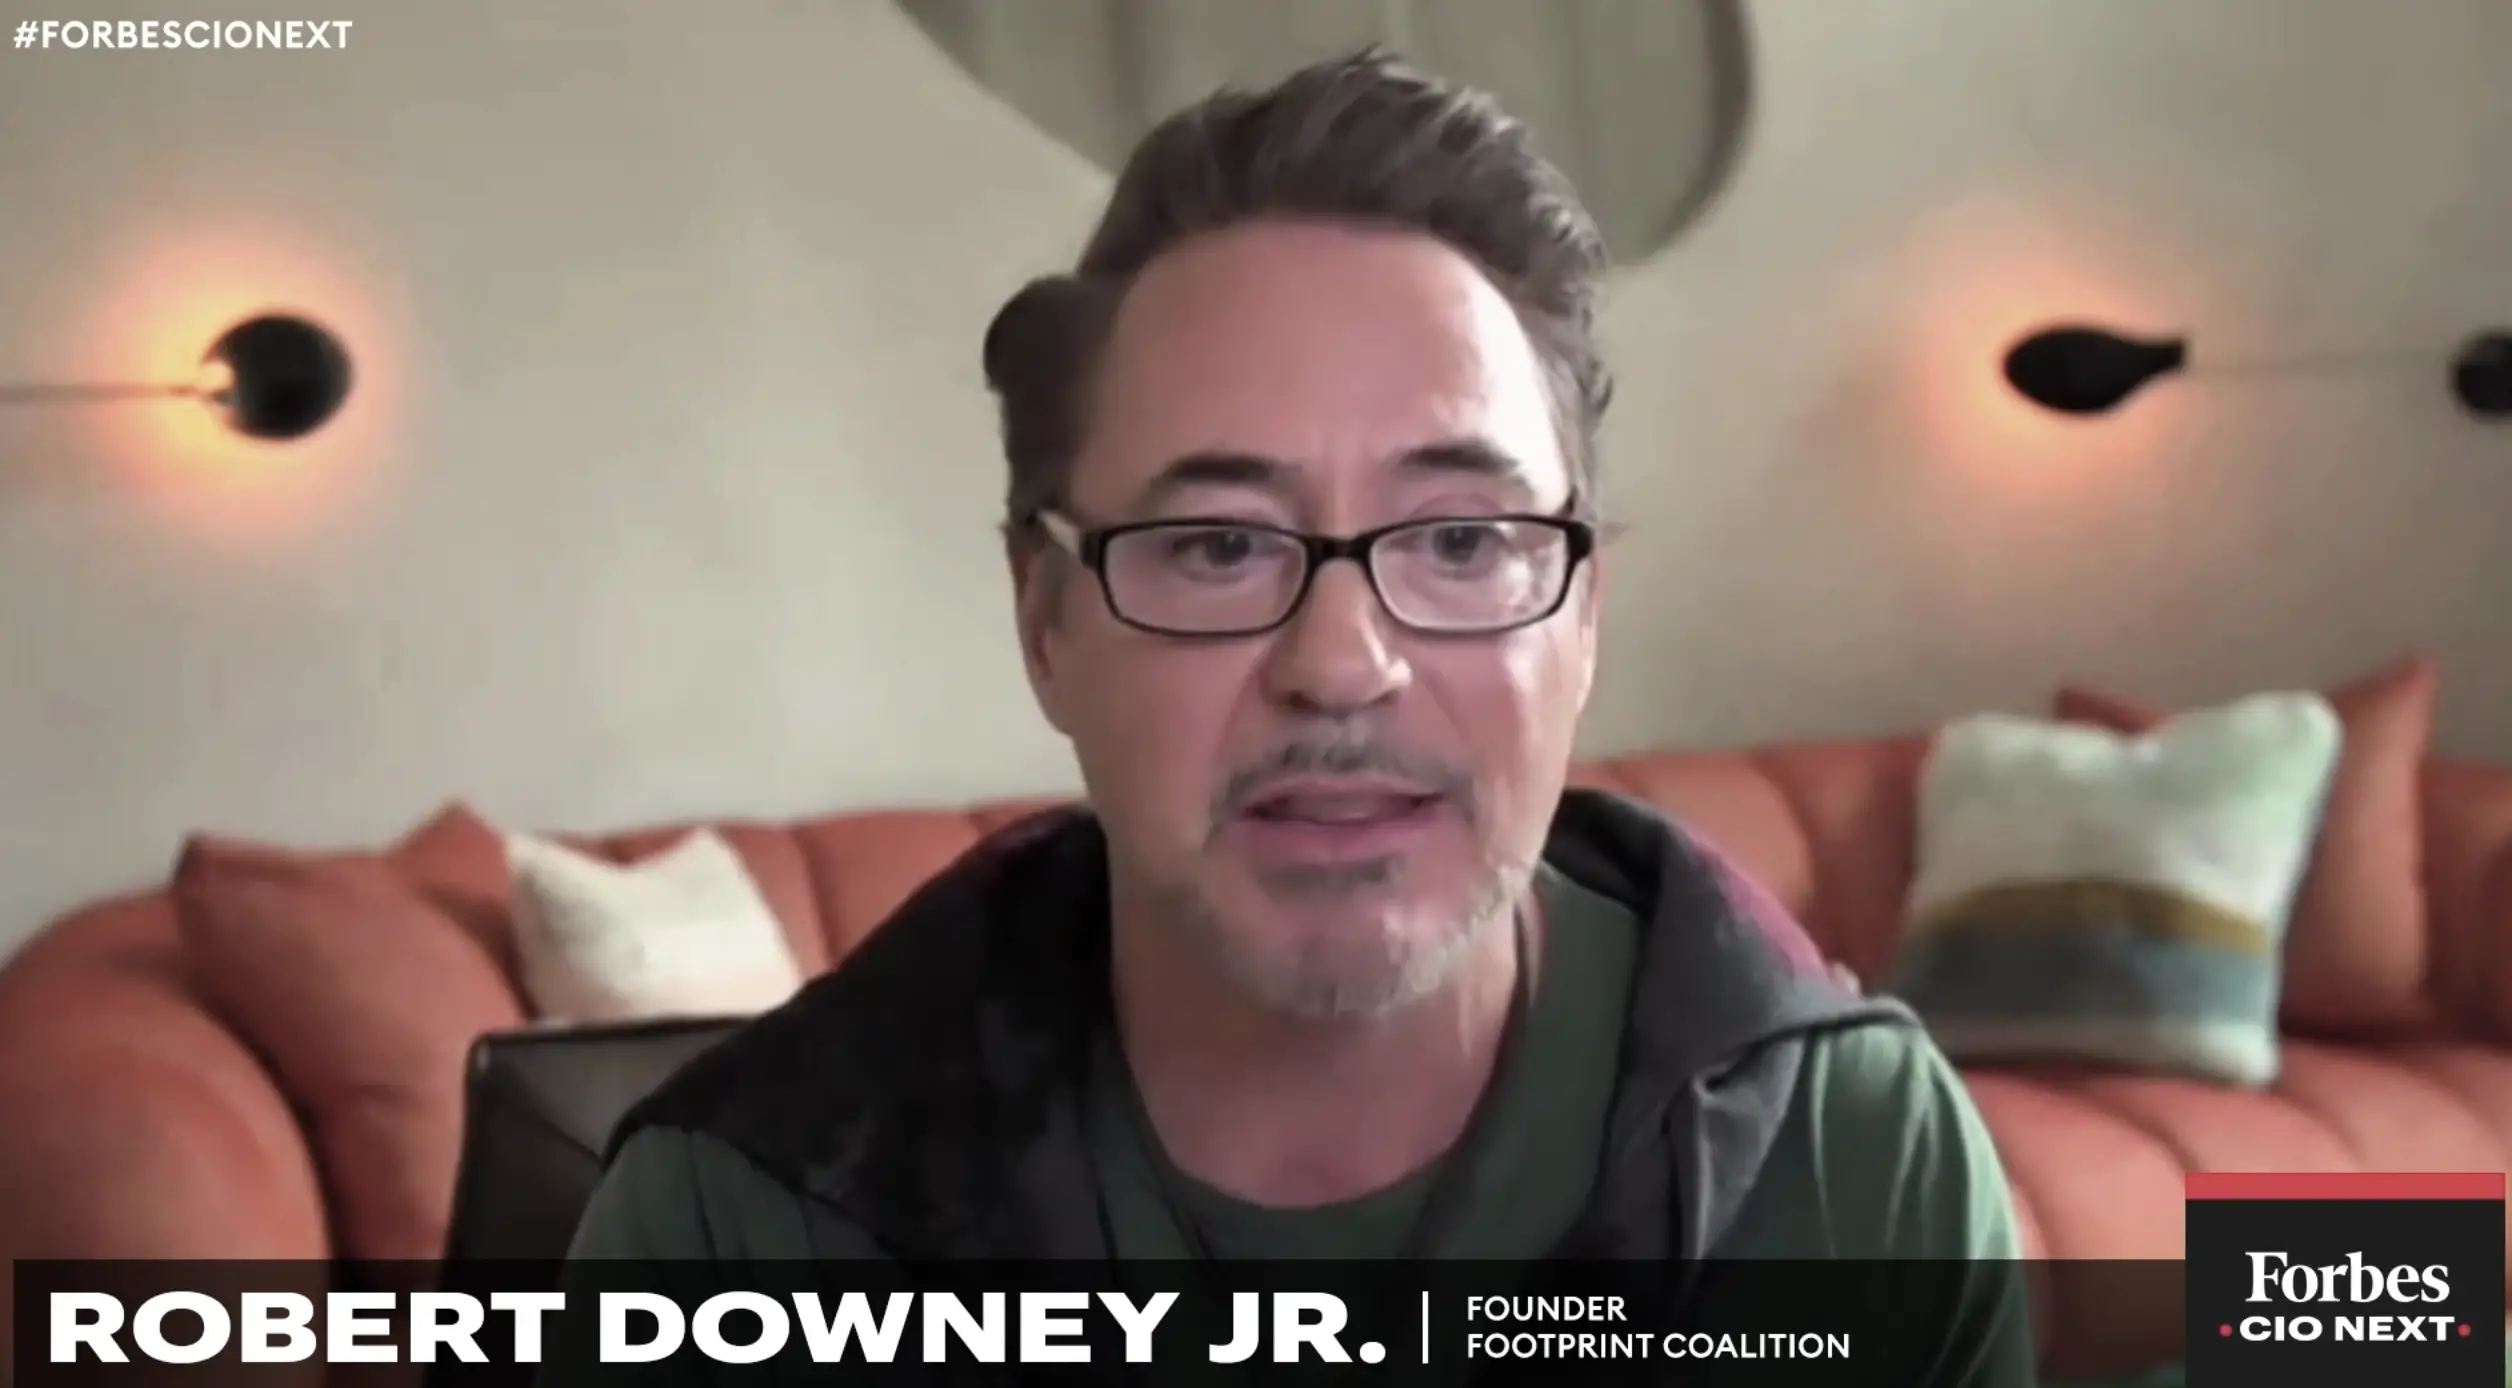 Robert Downey Jr. Founder of Footprint Coalition speaking with Forbes